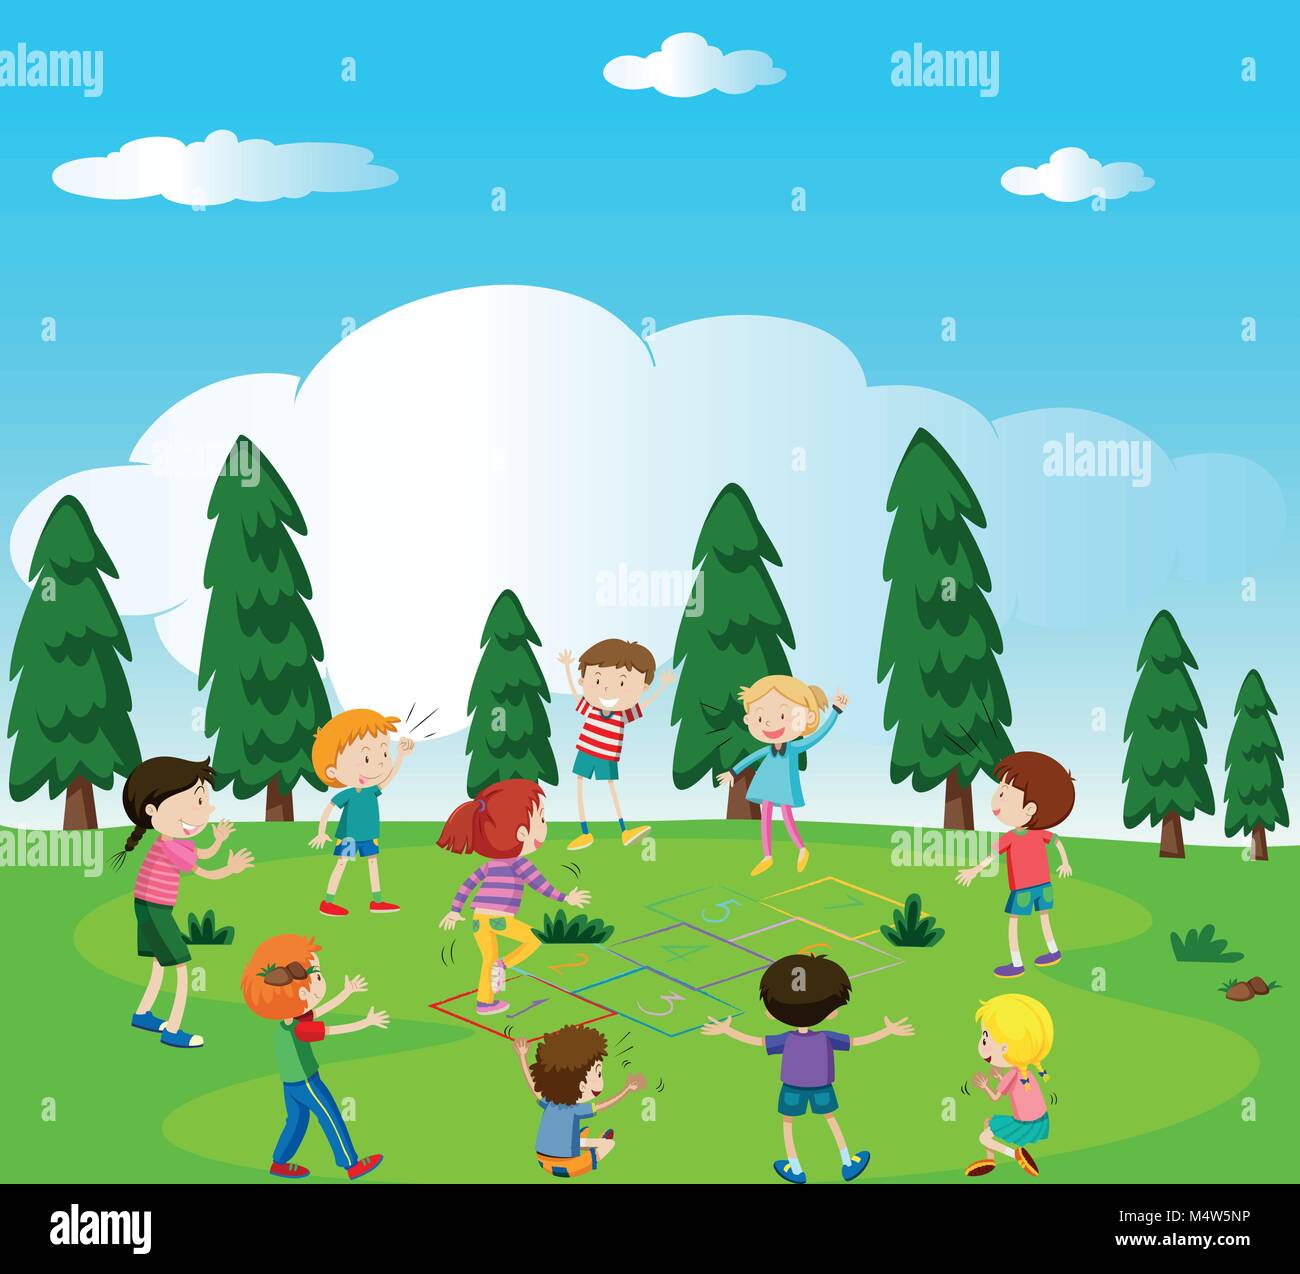 Happy kids playing hopscotch in the park illustration Stock Vector ...